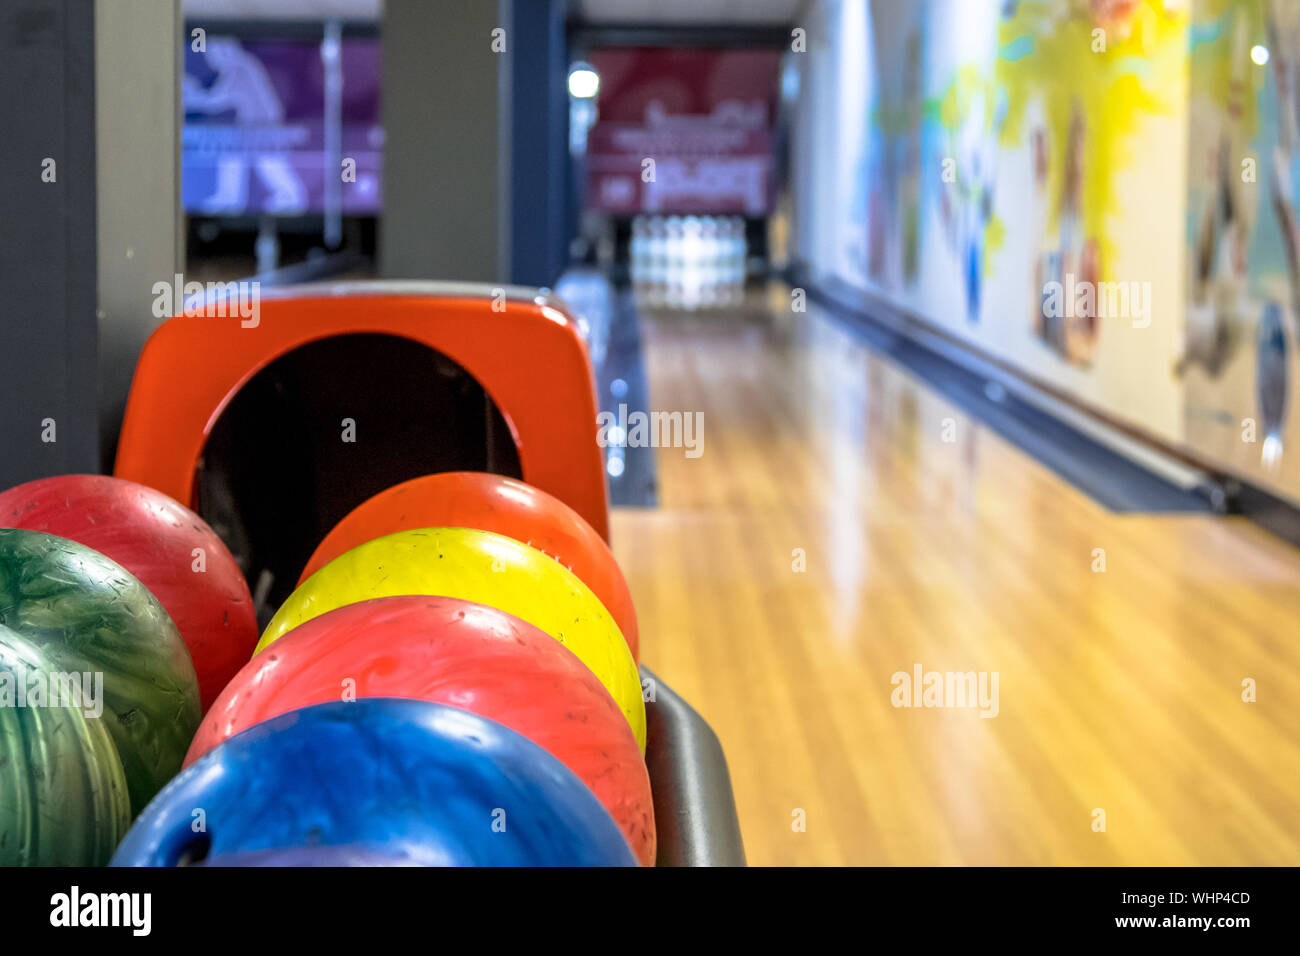 Bowling balls in a row waiting to be thrown at bowling club Stock Photo